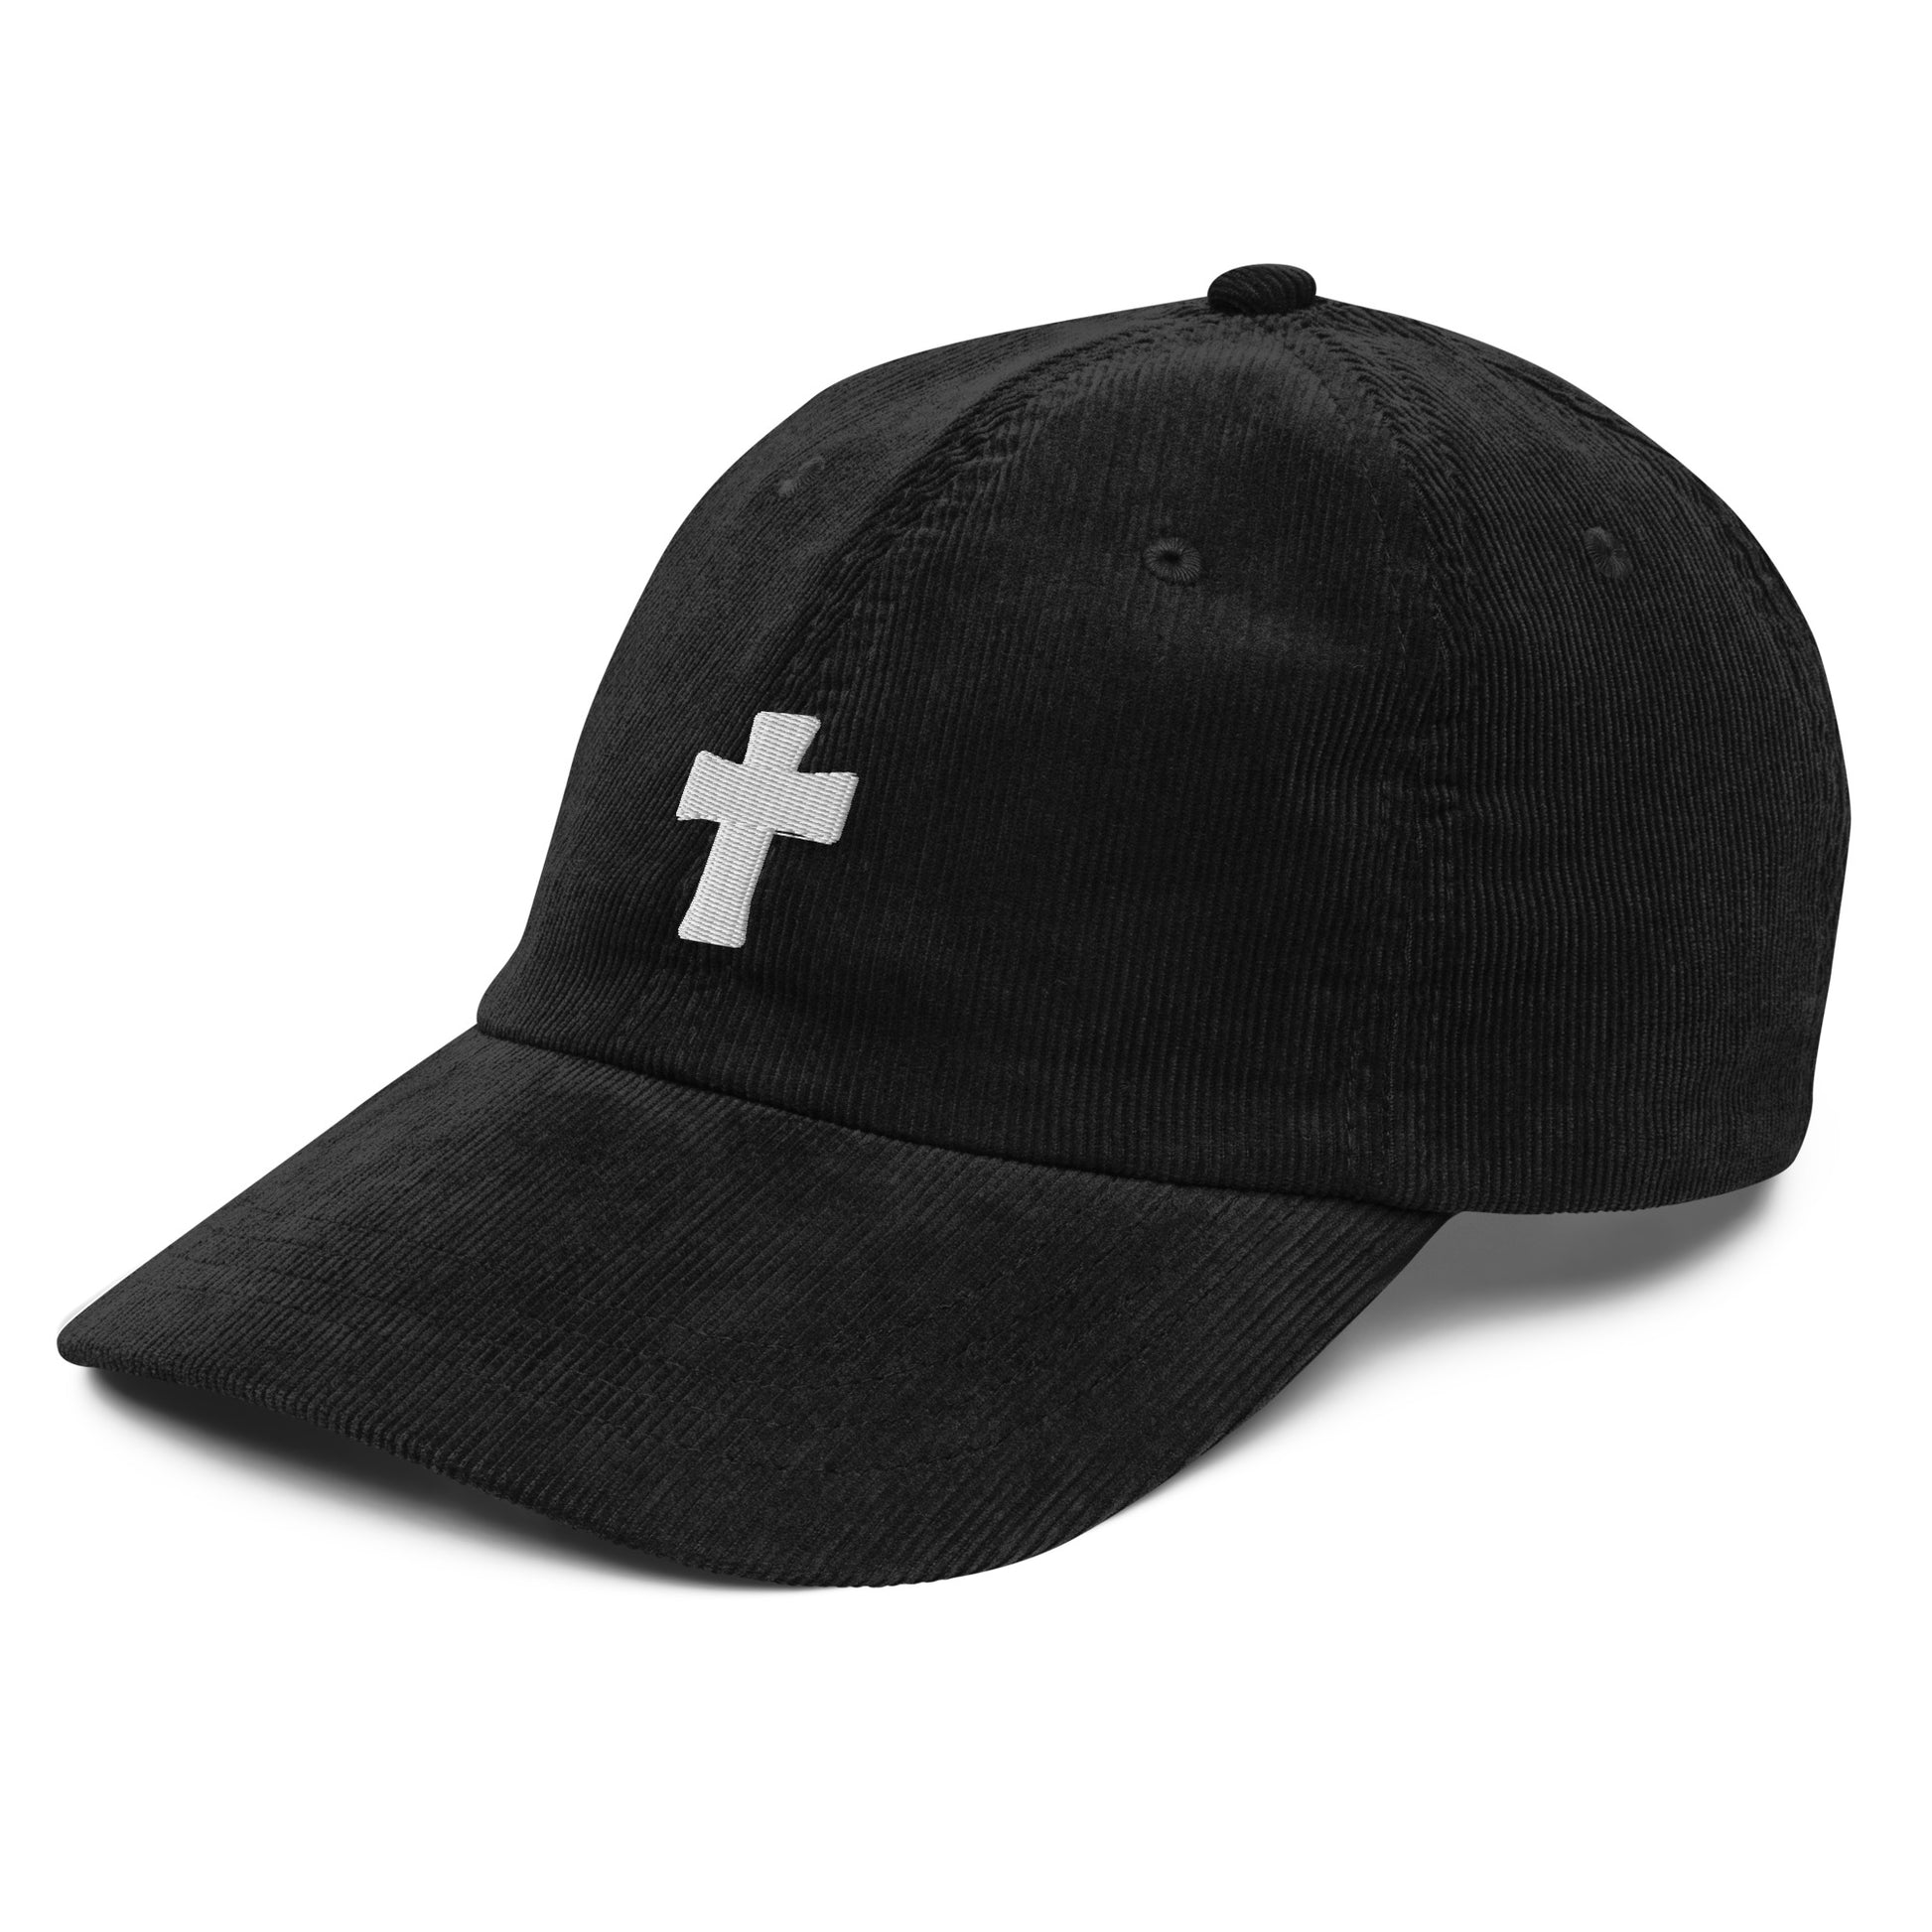 Embroidered Cross Vintage Corduroy Cap - A Thousand Elsewhere